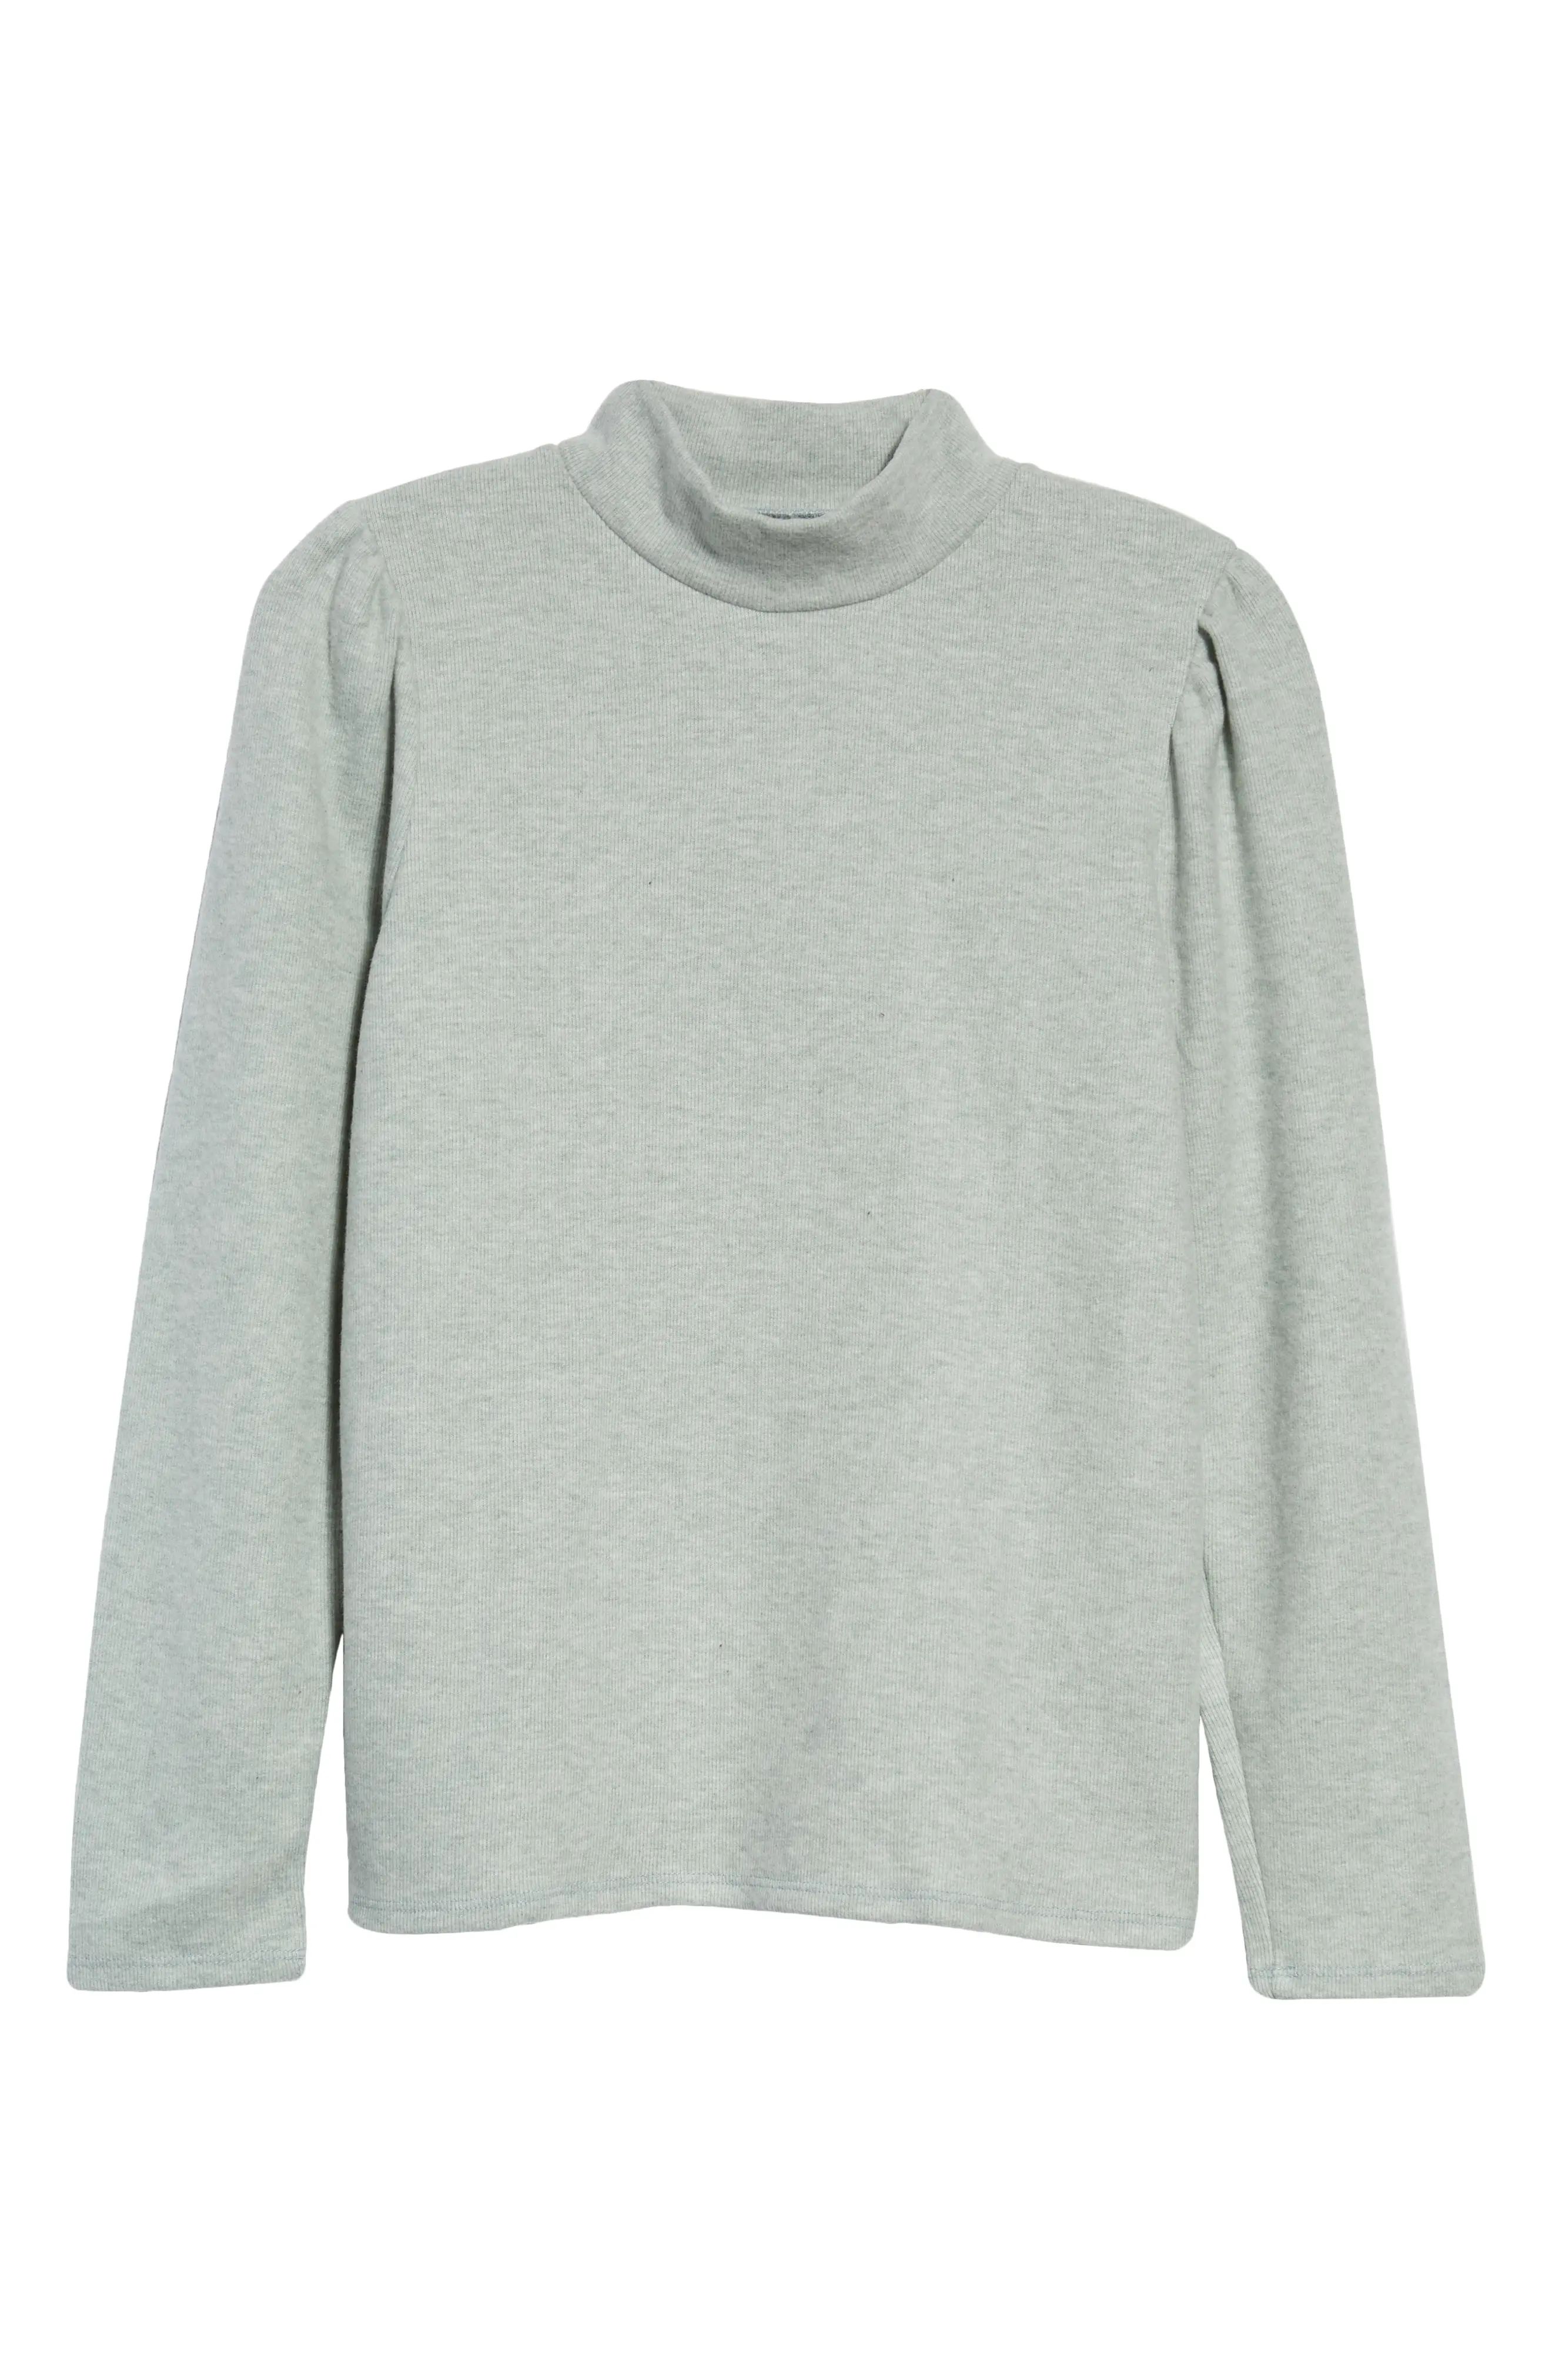 Madewell Resourced Plush Mock Neck Puff Sleeve Top in Heather Sage Mist at Nordstrom, Size X-Large | Nordstrom